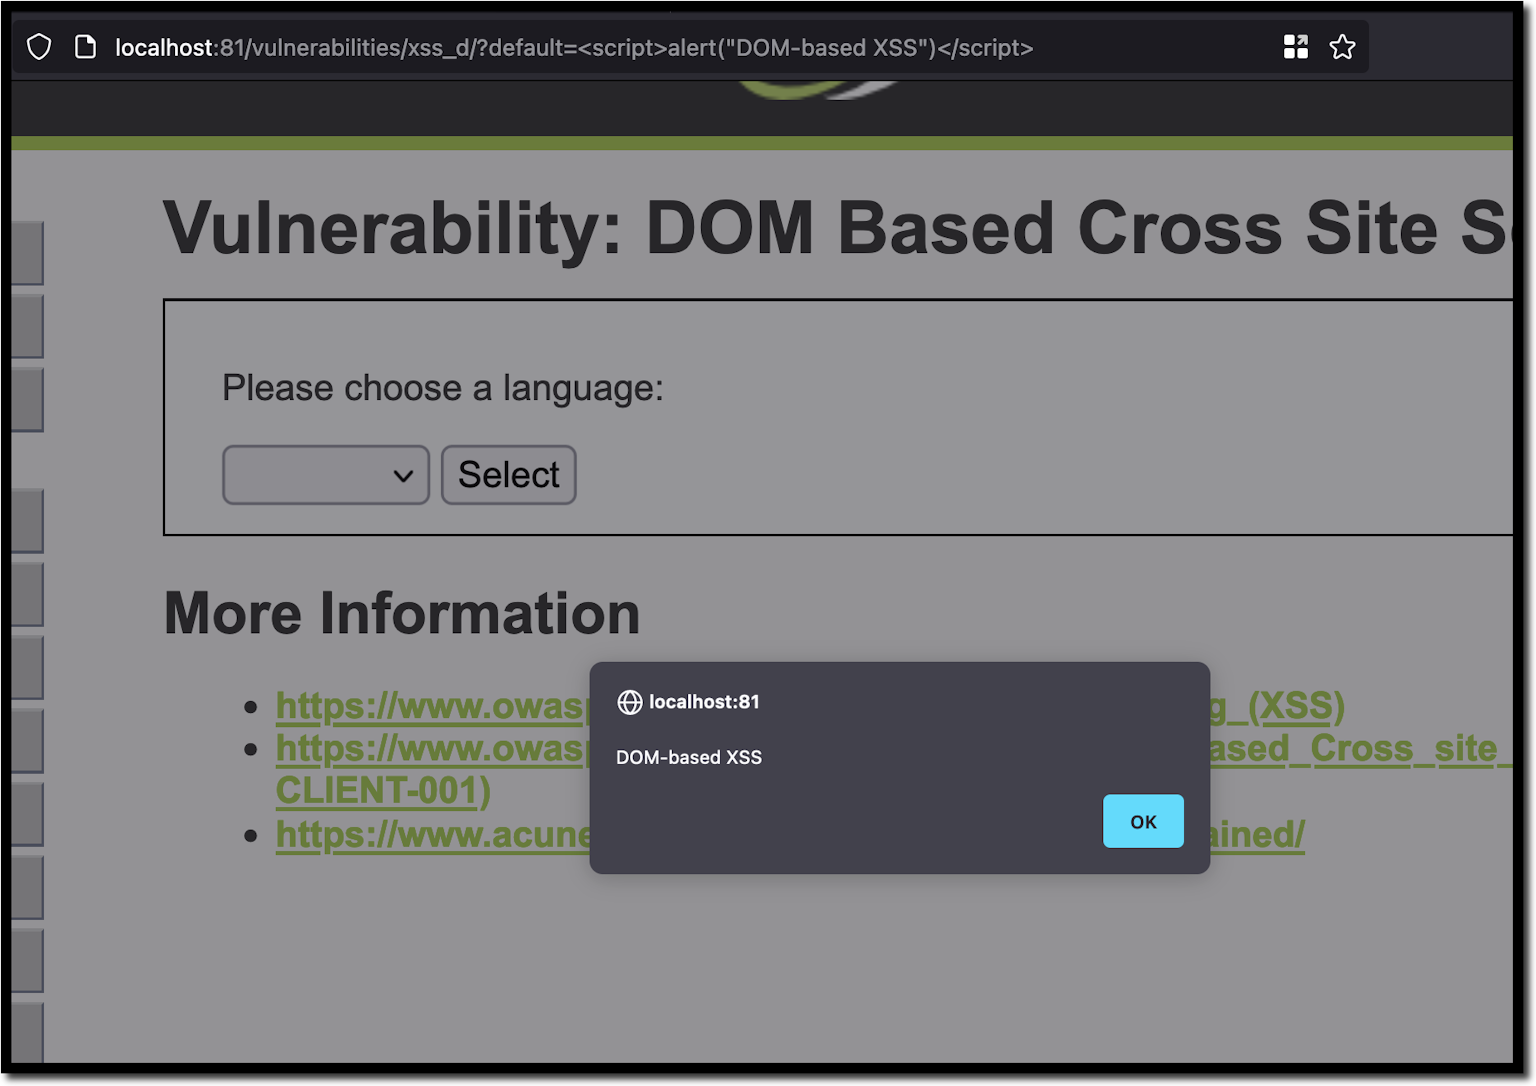 dom-based xss attack